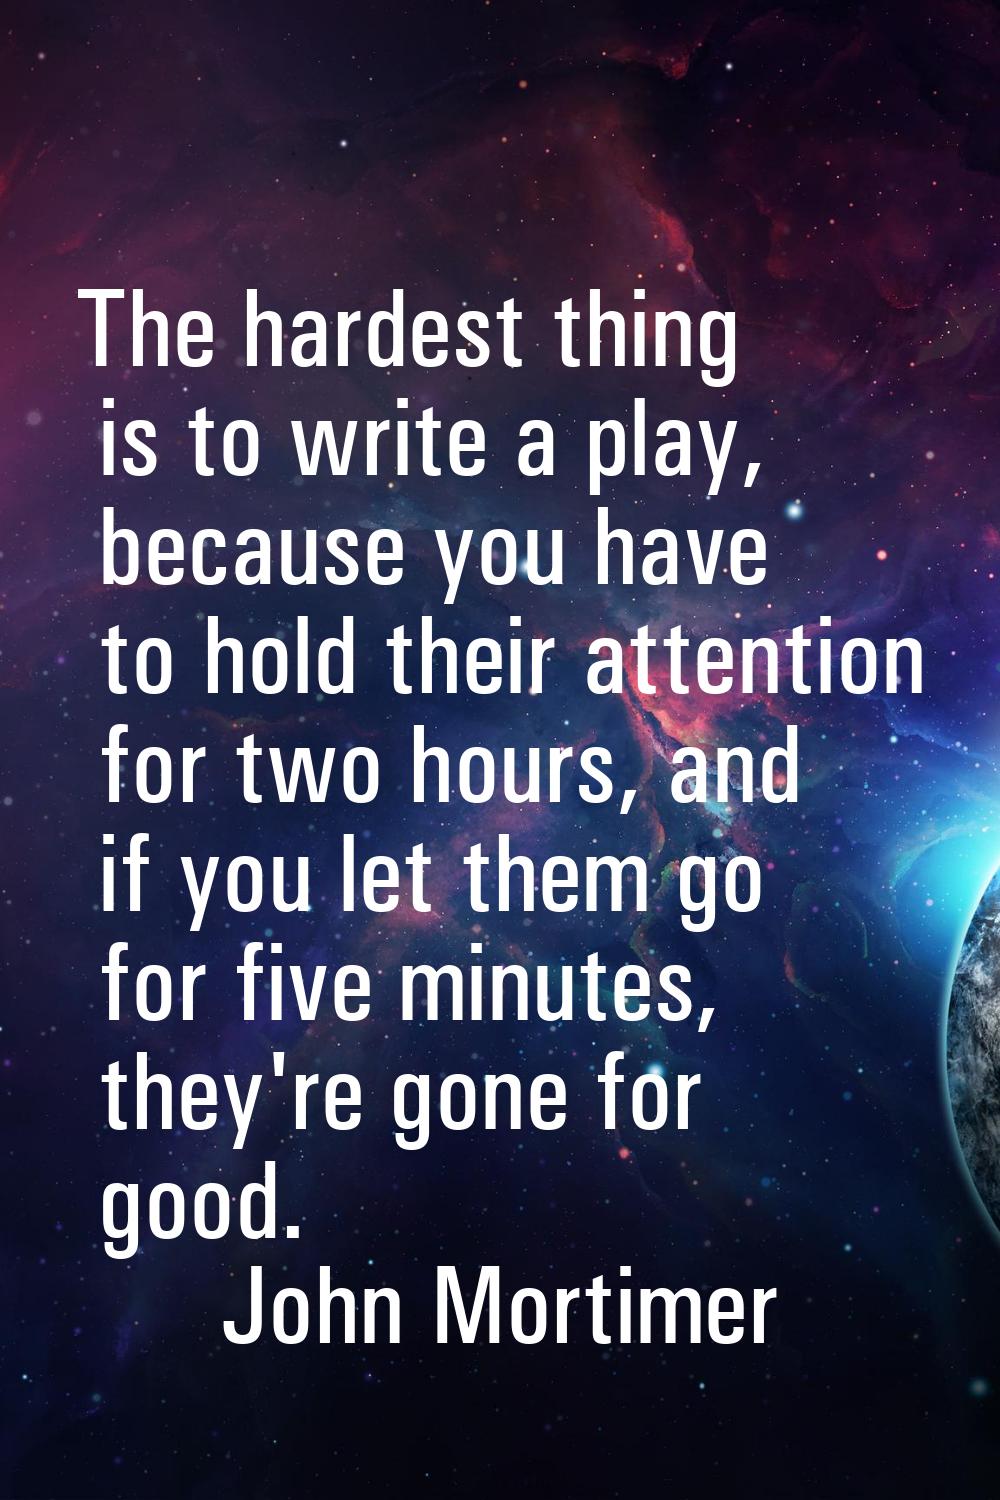 The hardest thing is to write a play, because you have to hold their attention for two hours, and i